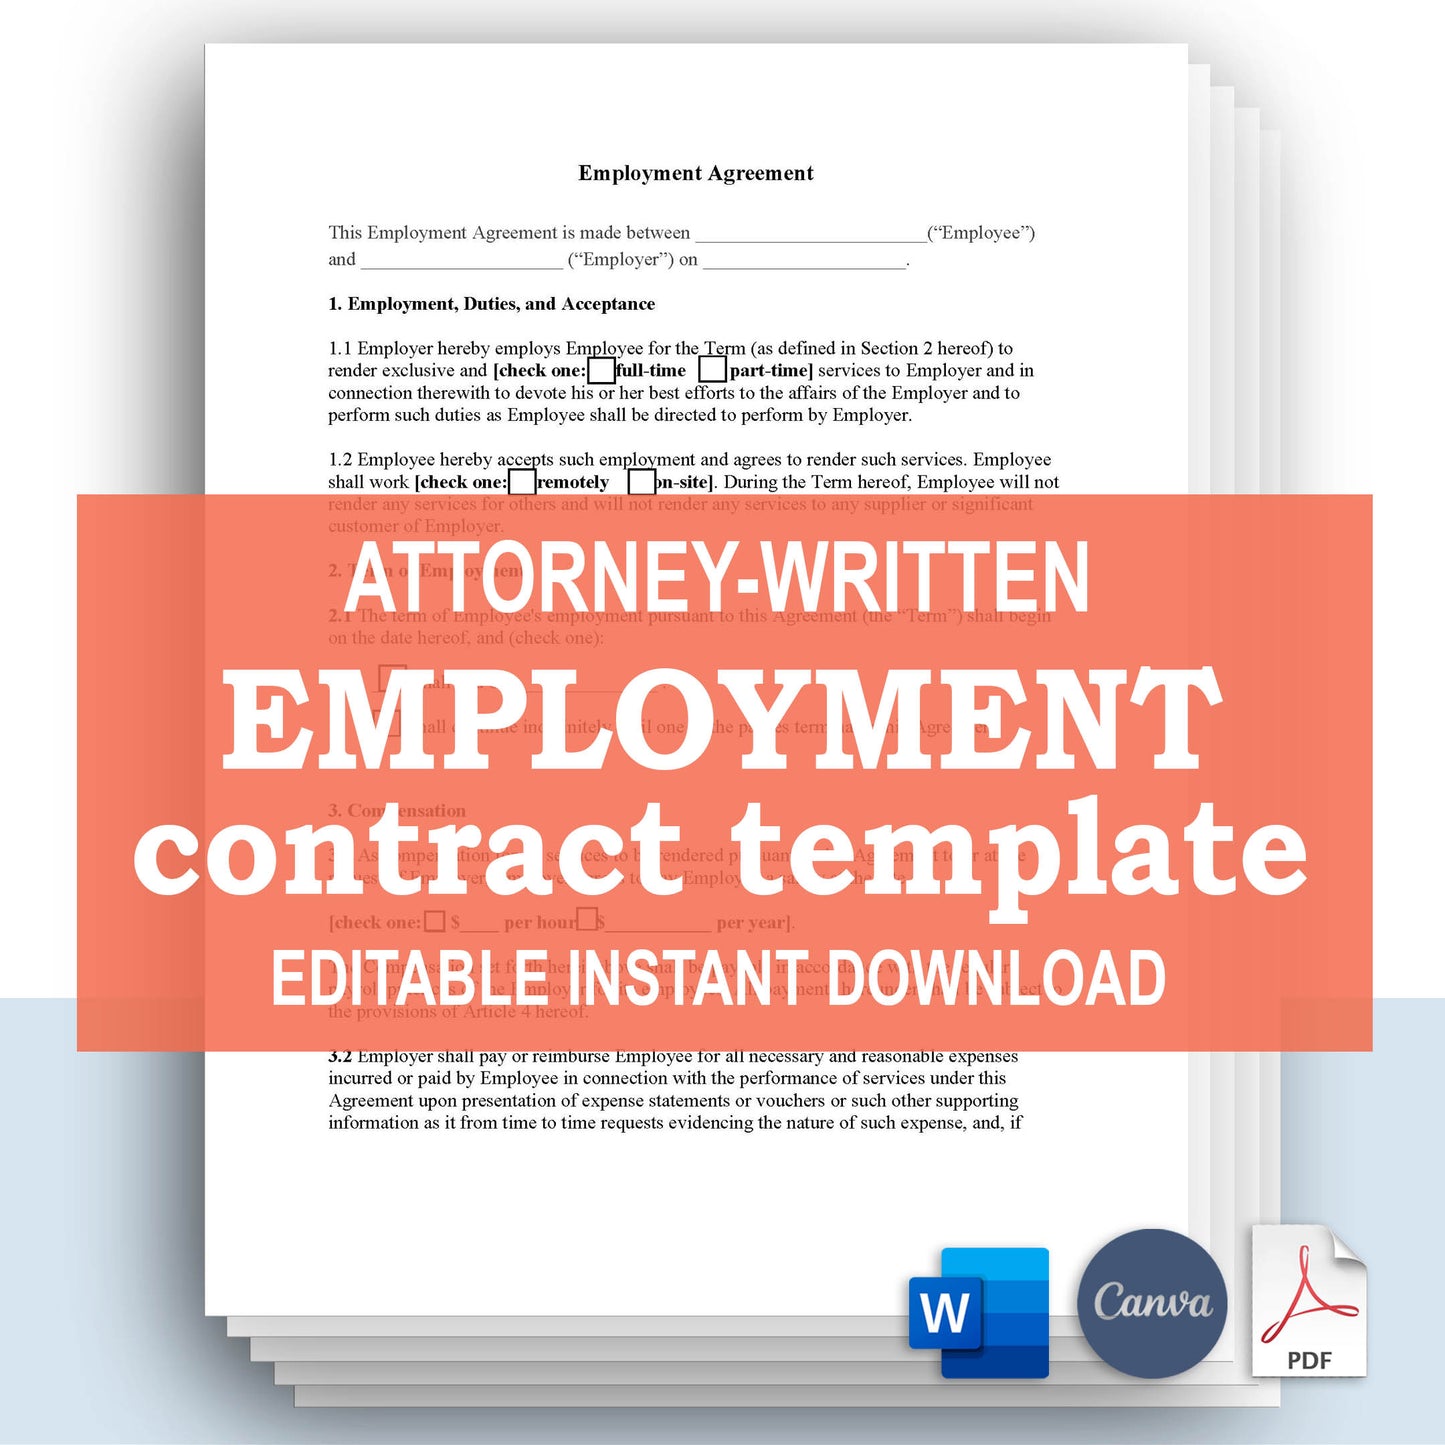 Employment Contract Template, Attorney-Written & Editable Instant Download